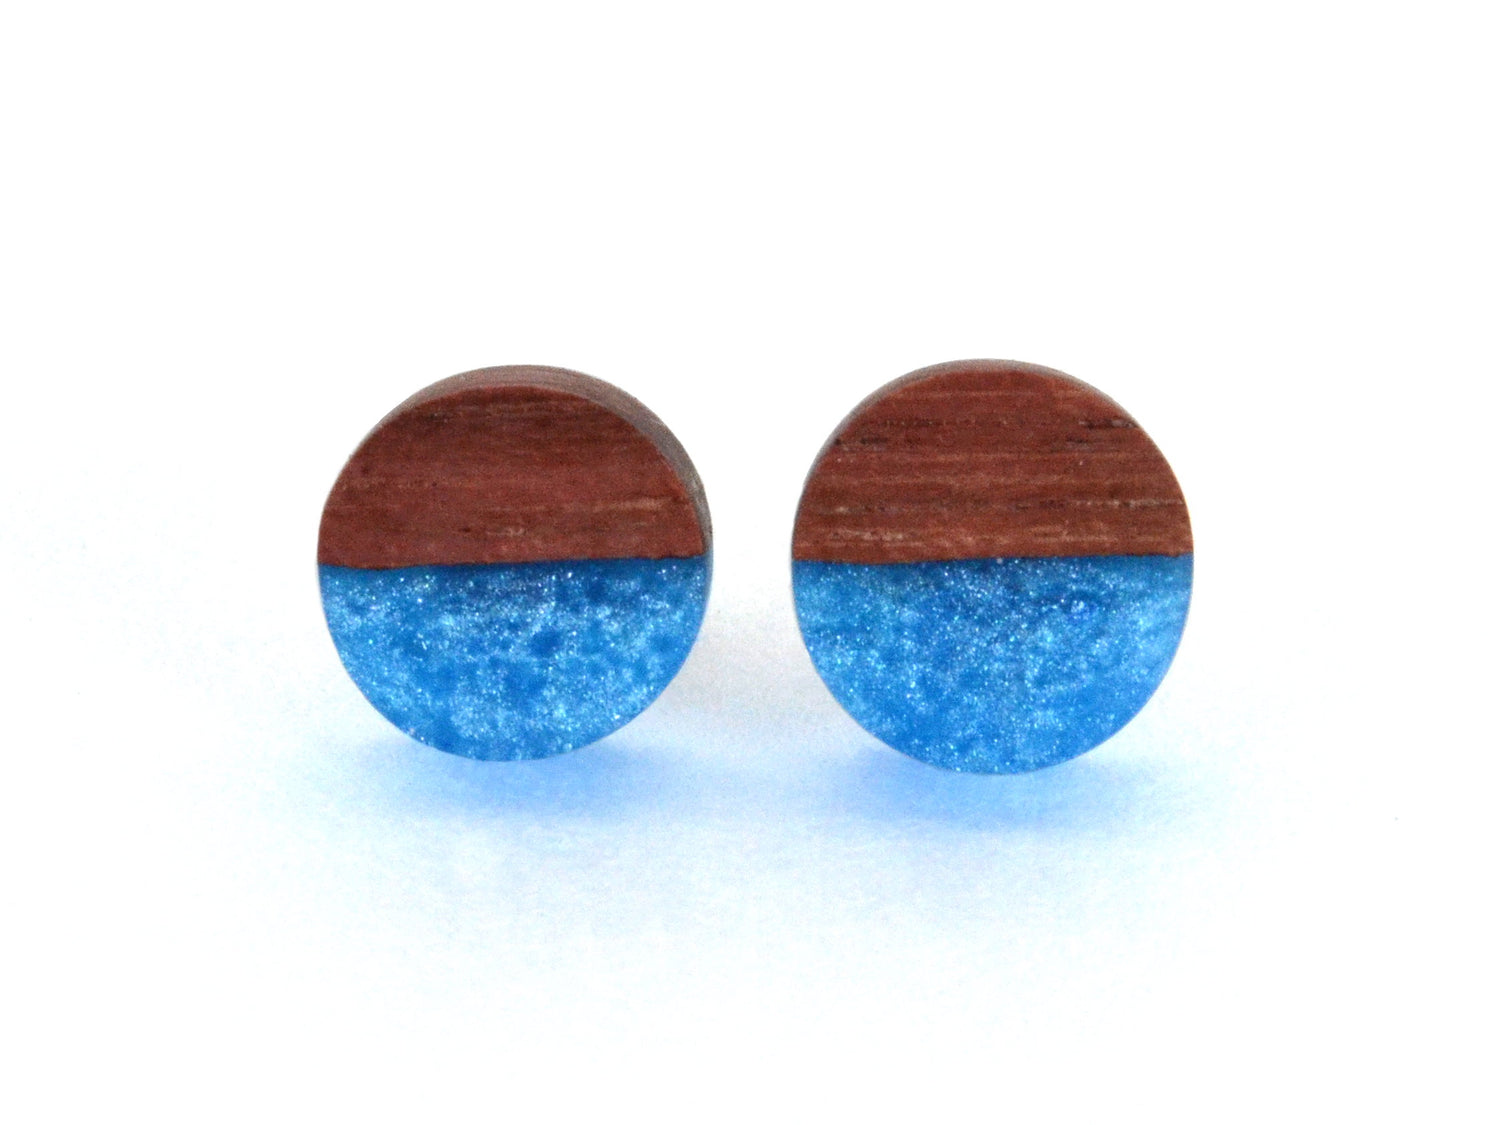 round half moon earring stud with ocean blue and purpleheart wood design